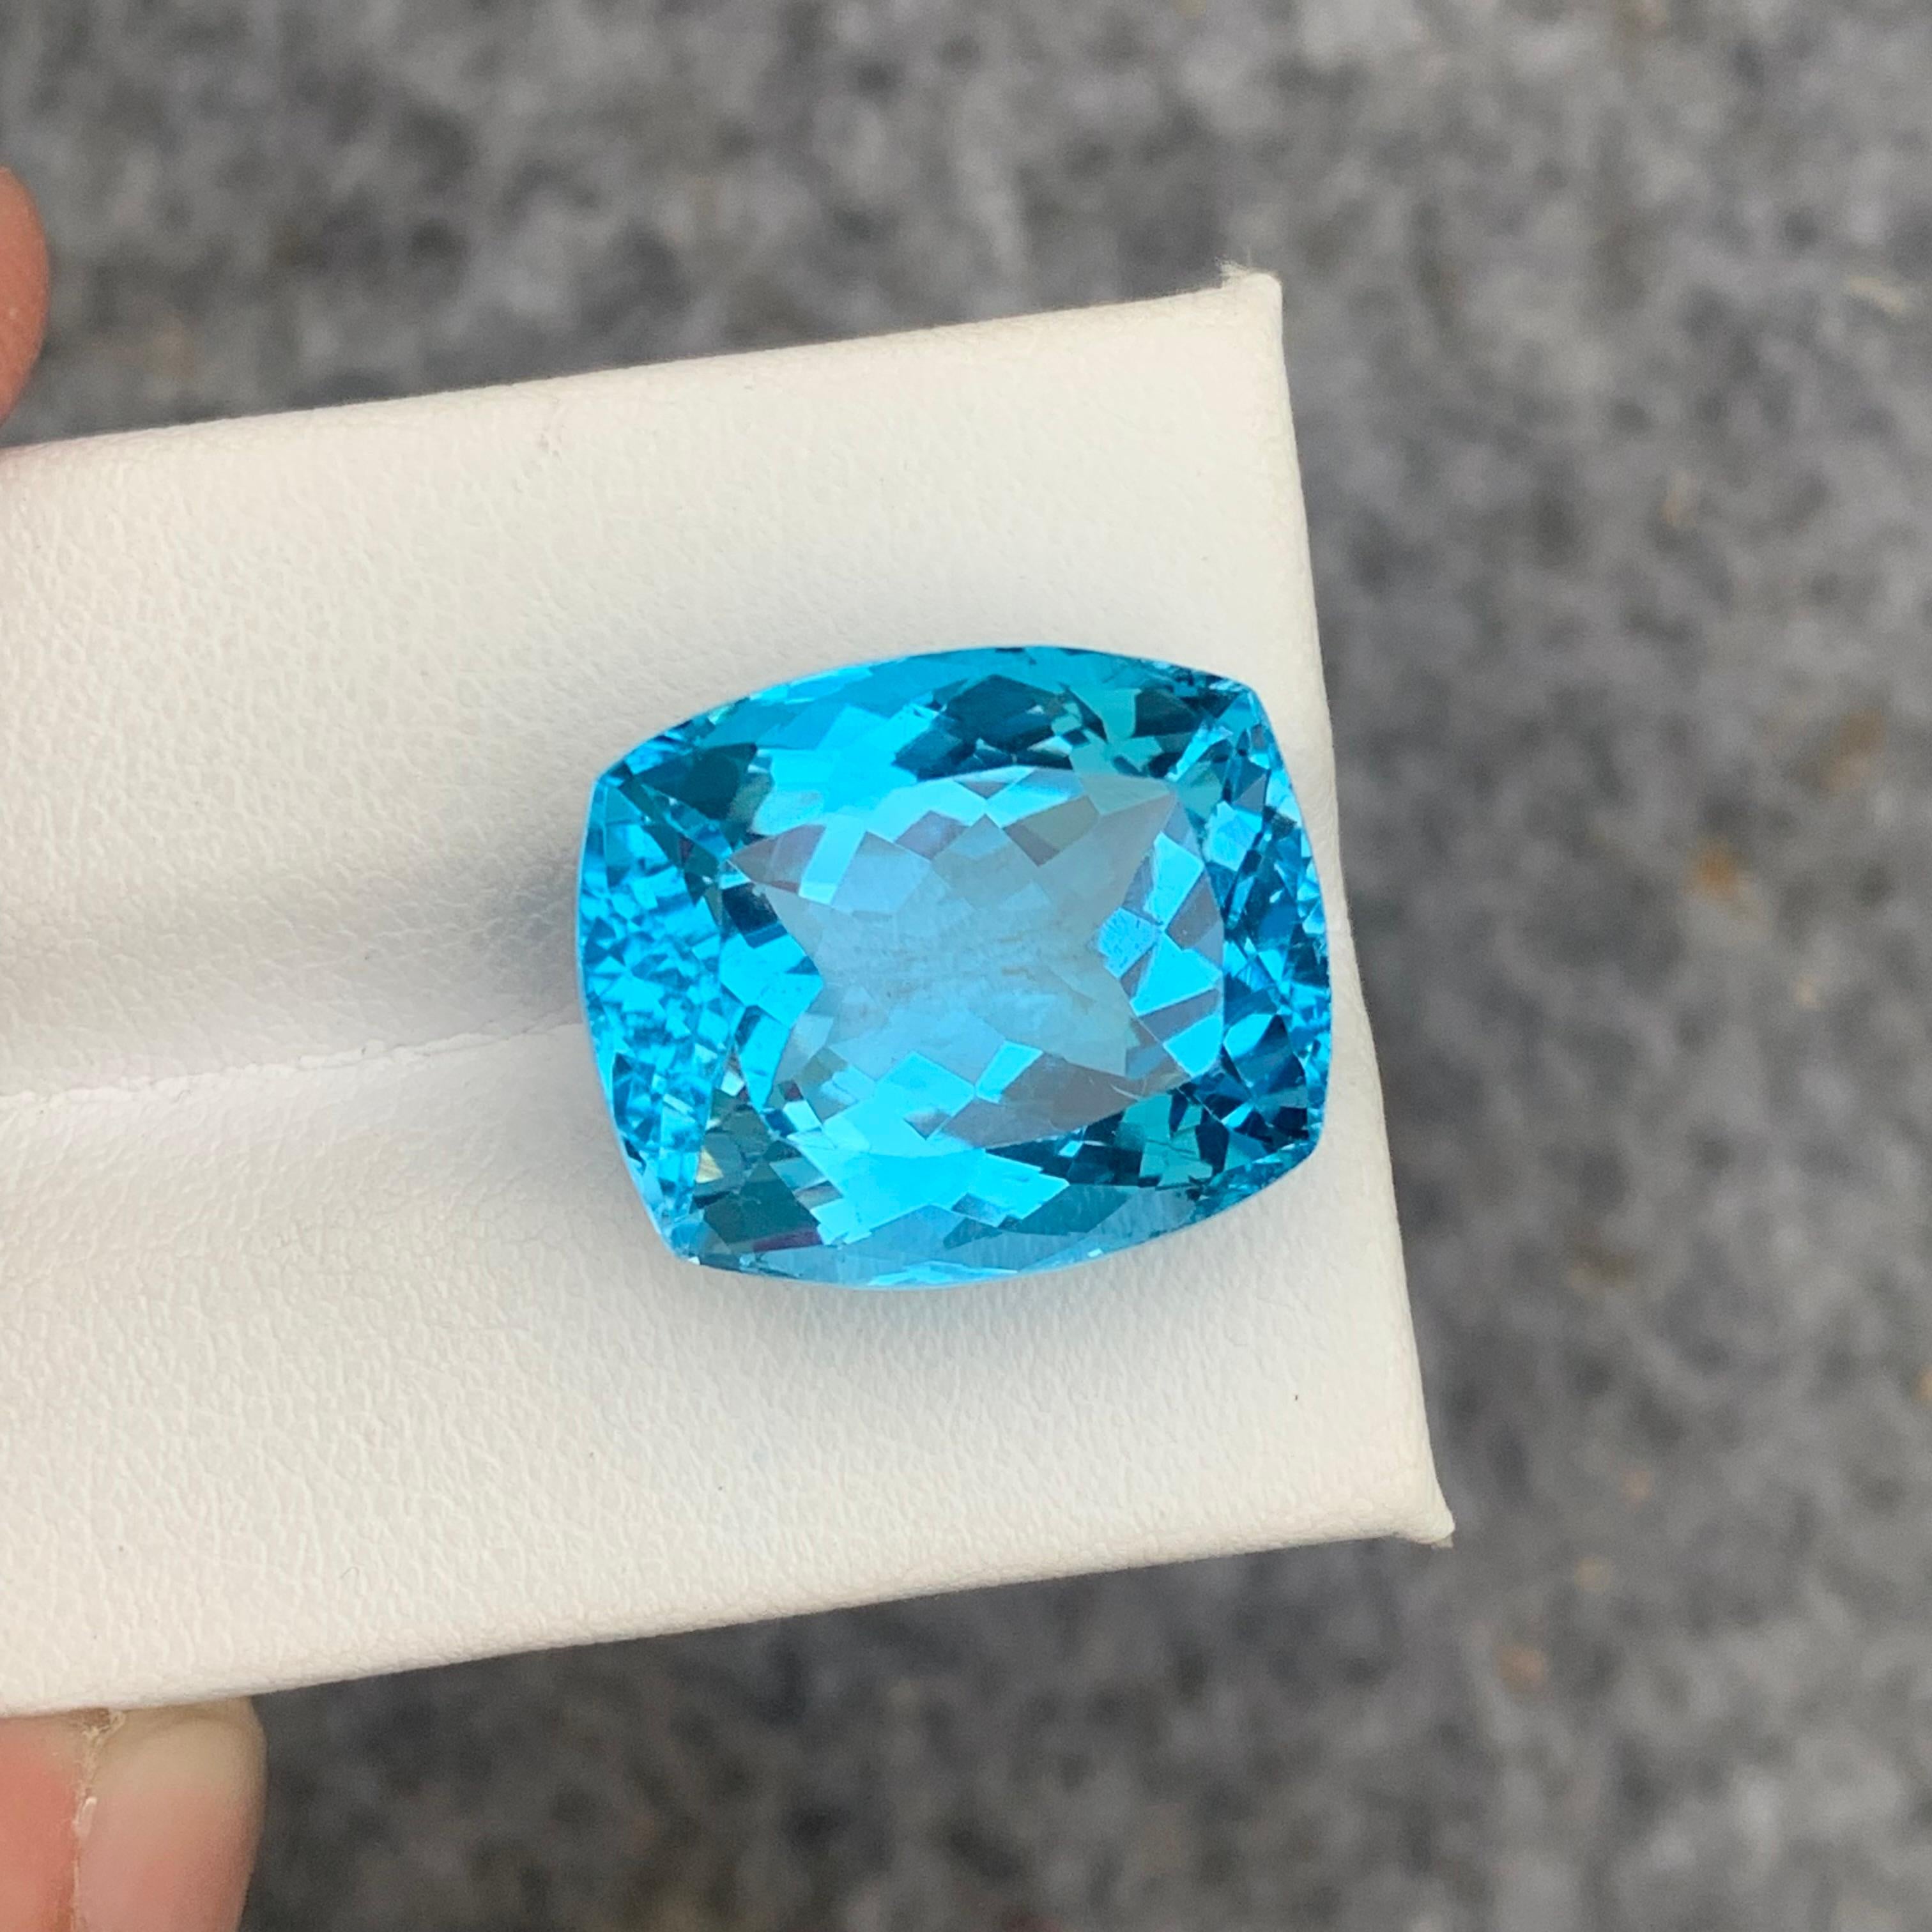 Gorgeous 31.10 Carat Loose Blue Topaz from Brazil Long Cushion Cut for Jewelry For Sale 3